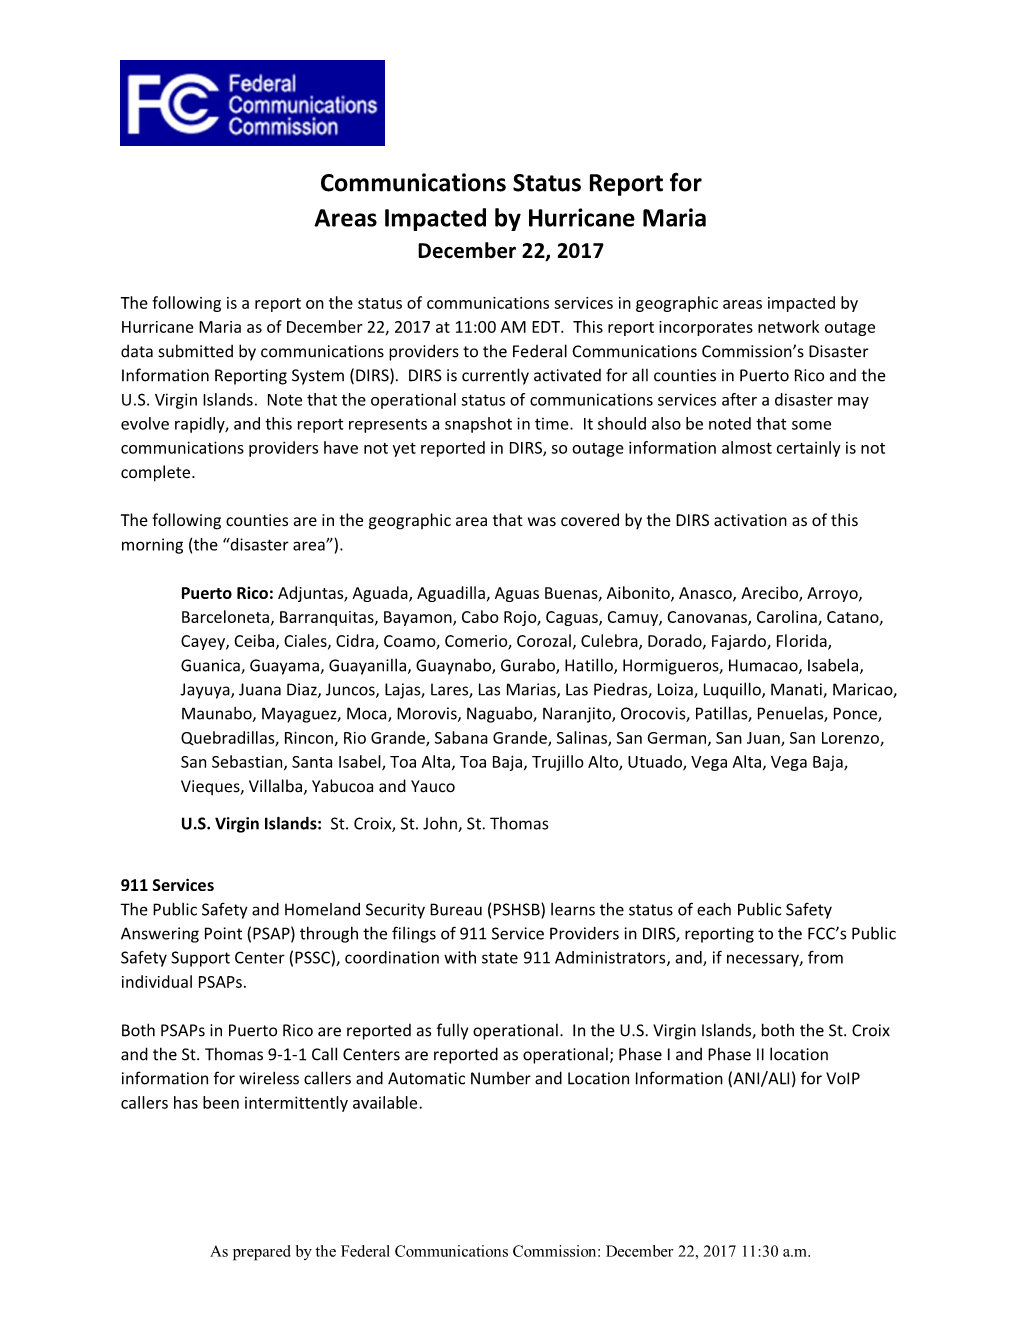 Communications Status Report for Areas Impacted by Hurricane Maria December 22, 2017